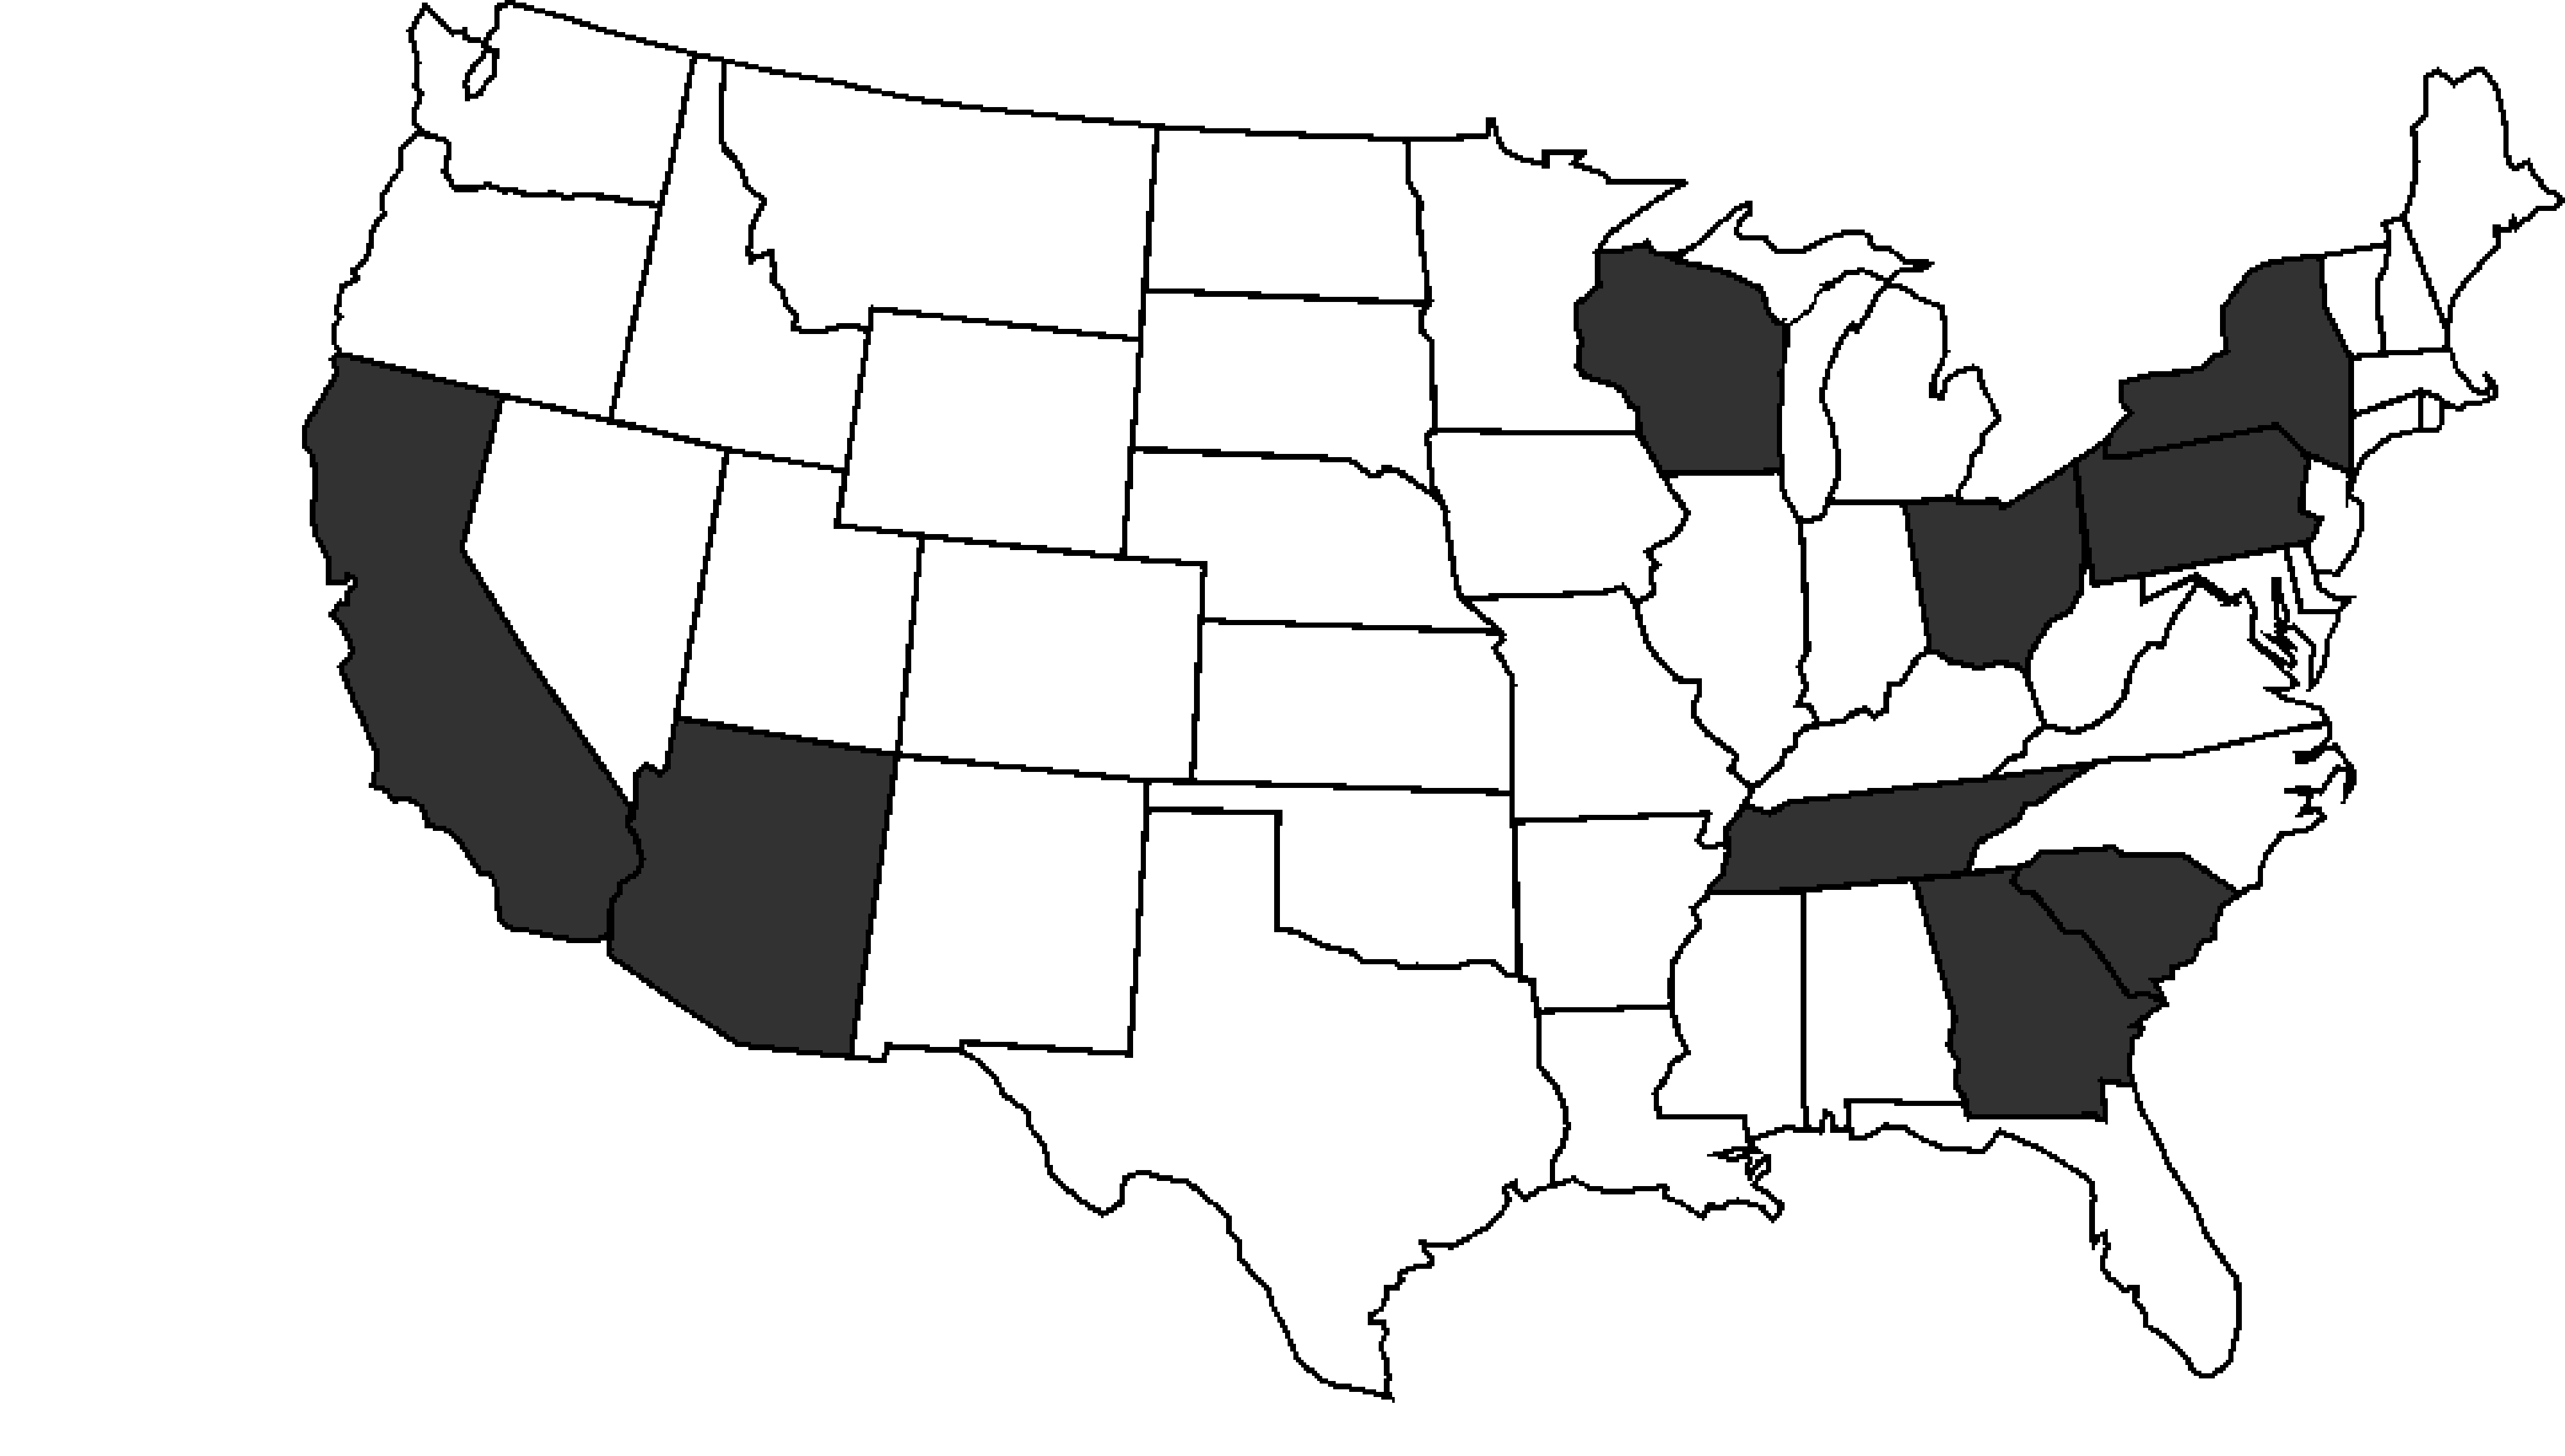 Graphic highlighting states with shipping facilities.